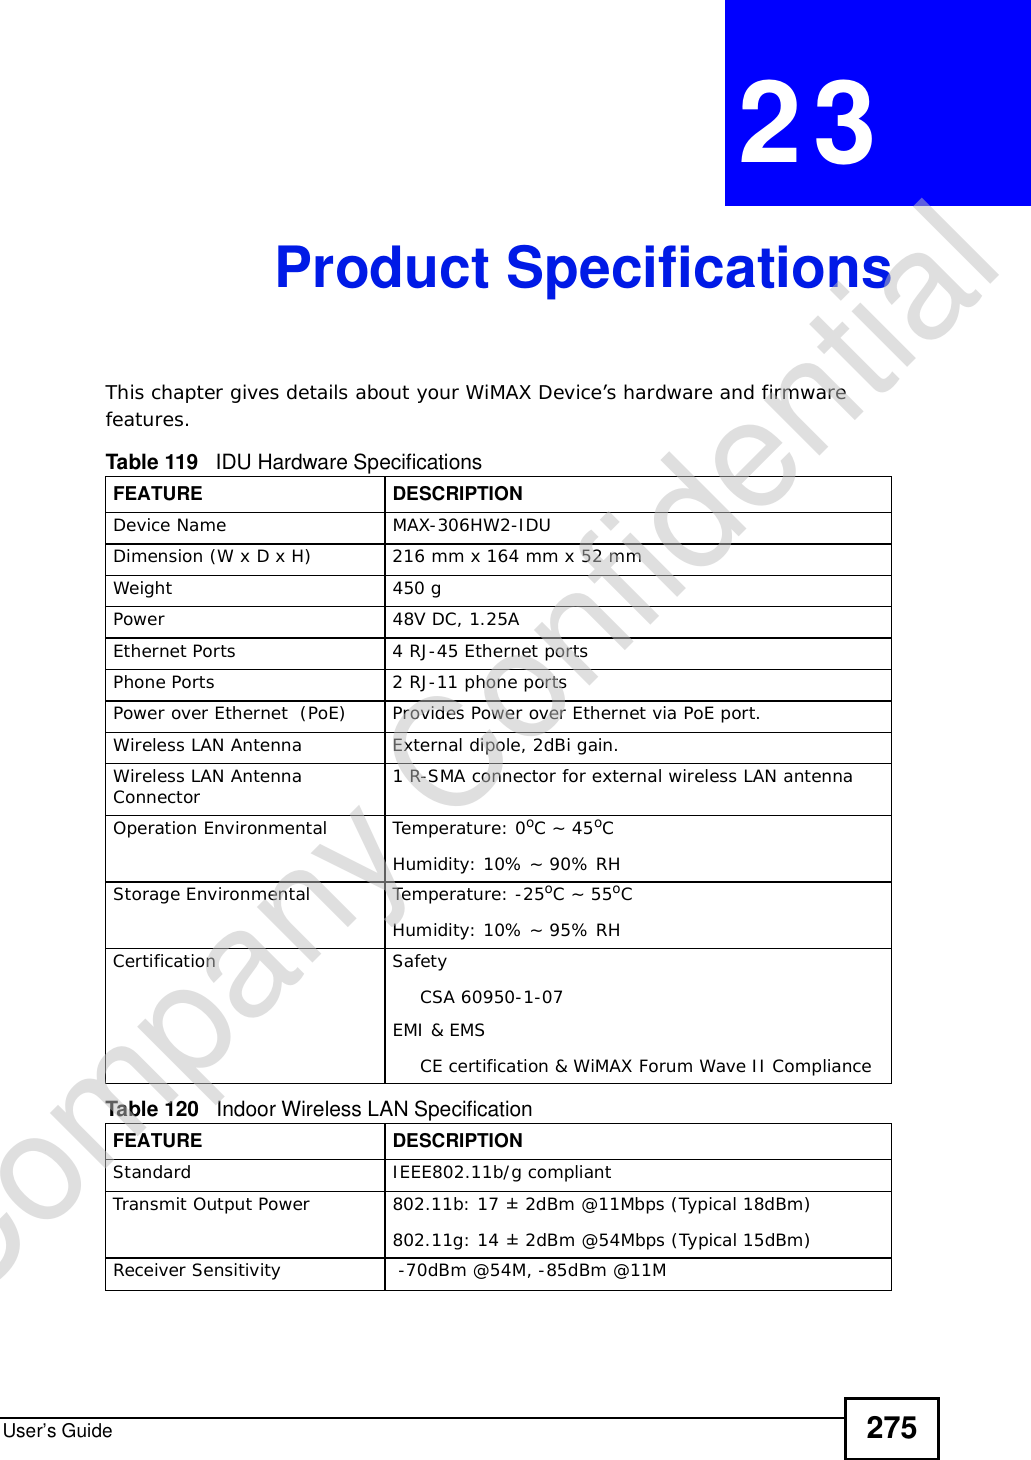 User’s Guide 275CHAPTER 23Product SpecificationsThis chapter gives details about your WiMAX Device’s hardware and firmware features.  Table 119   IDU Hardware SpecificationsFEATUREDESCRIPTIONDevice NameMAX-306HW2-IDUDimension (W x D x H)216 mm x 164 mm x 52 mmWeight450 gPower48V DC, 1.25AEthernet Ports4 RJ-45 Ethernet portsPhone Ports2 RJ-11 phone portsPower over Ethernet  (PoE)Provides Power over Ethernet via PoE port.Wireless LAN AntennaExternal dipole, 2dBi gain.Wireless LAN Antenna Connector 1 R-SMA connector for external wireless LAN antennaOperation Environmental Temperature: 0oC ~ 45oCHumidity: 10% ~ 90% RHStorage Environmental Temperature: -25oC ~ 55oCHumidity: 10% ~ 95% RHCertificationSafetyCSA 60950-1-07EMI &amp; EMSCE certification &amp; WiMAX Forum Wave II ComplianceTable 120   Indoor Wireless LAN SpecificationFEATUREDESCRIPTIONStandard IEEE802.11b/g compliantTransmit Output Power802.11b: 17 ± 2dBm @11Mbps (Typical 18dBm)802.11g: 14 ± 2dBm @54Mbps (Typical 15dBm)Receiver Sensitivity -70dBm @54M, -85dBm @11MCompany Confidential